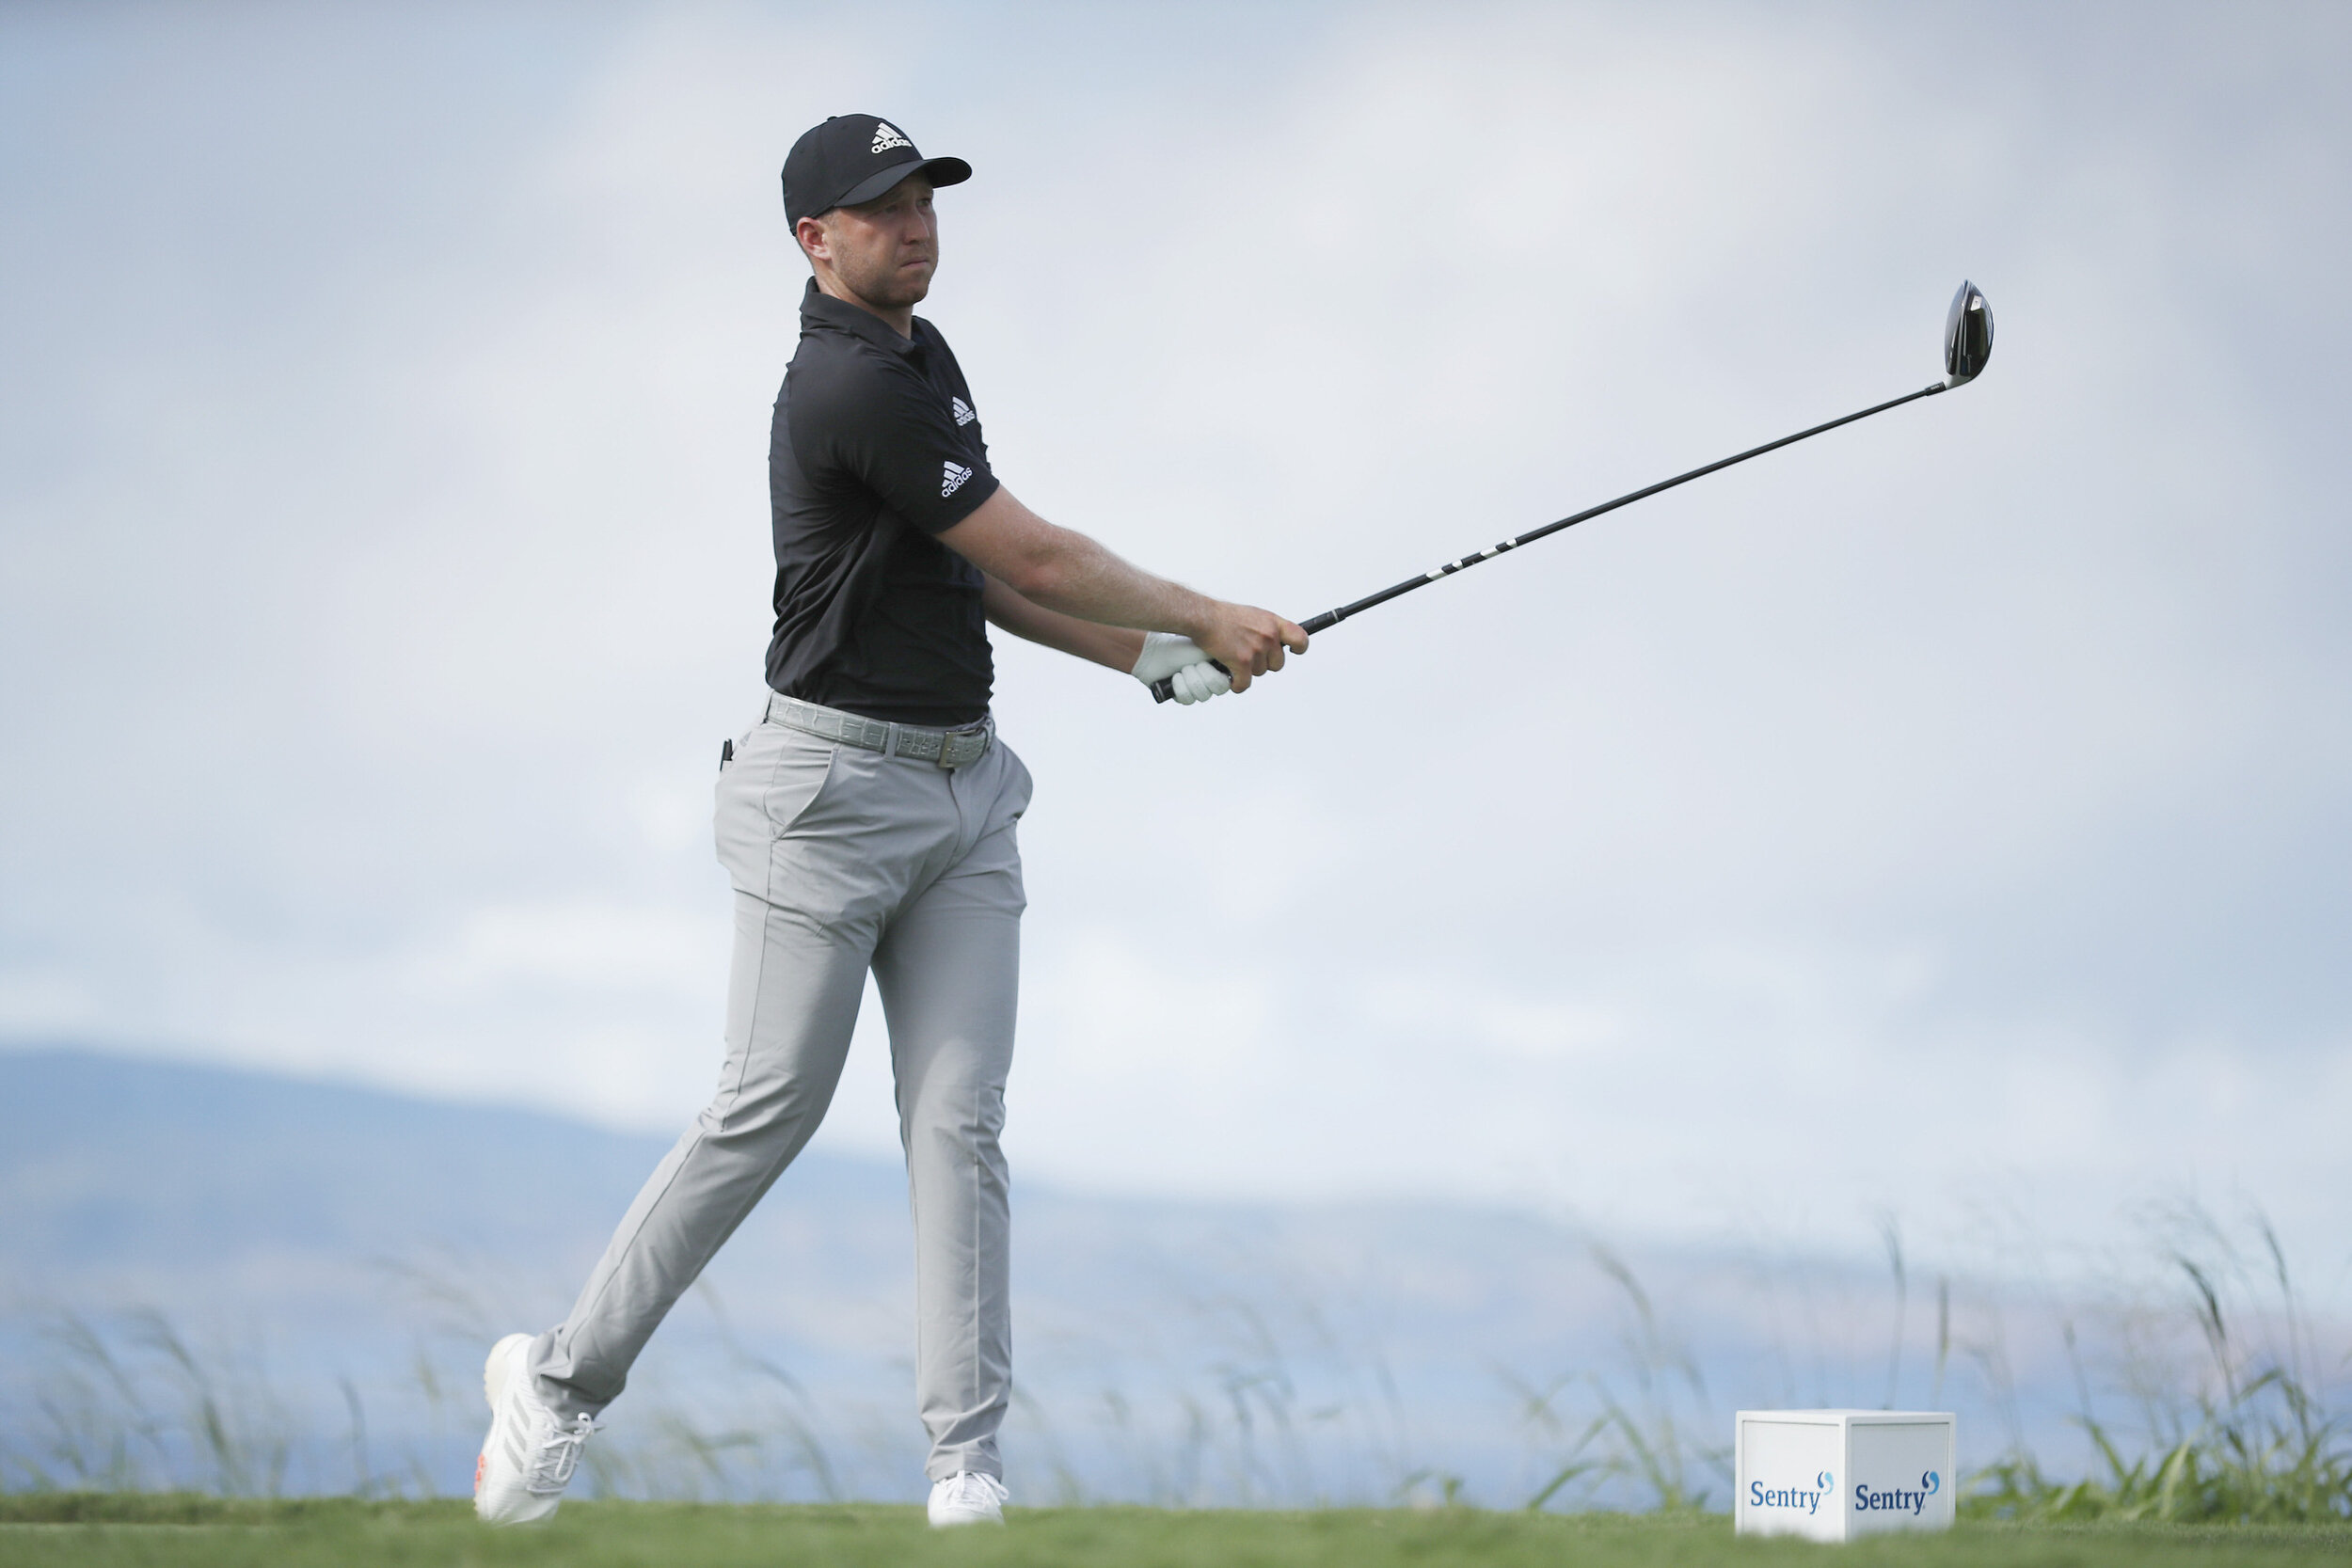  KAPALUA, HAWAII - JANUARY 09: Daniel Berger of the United States plays his shot from the 13th tee during the third round of the Sentry Tournament Of Champions at the Kapalua Plantation Course on January 09, 2021 in Kapalua, Hawaii. (Photo by Cliff H